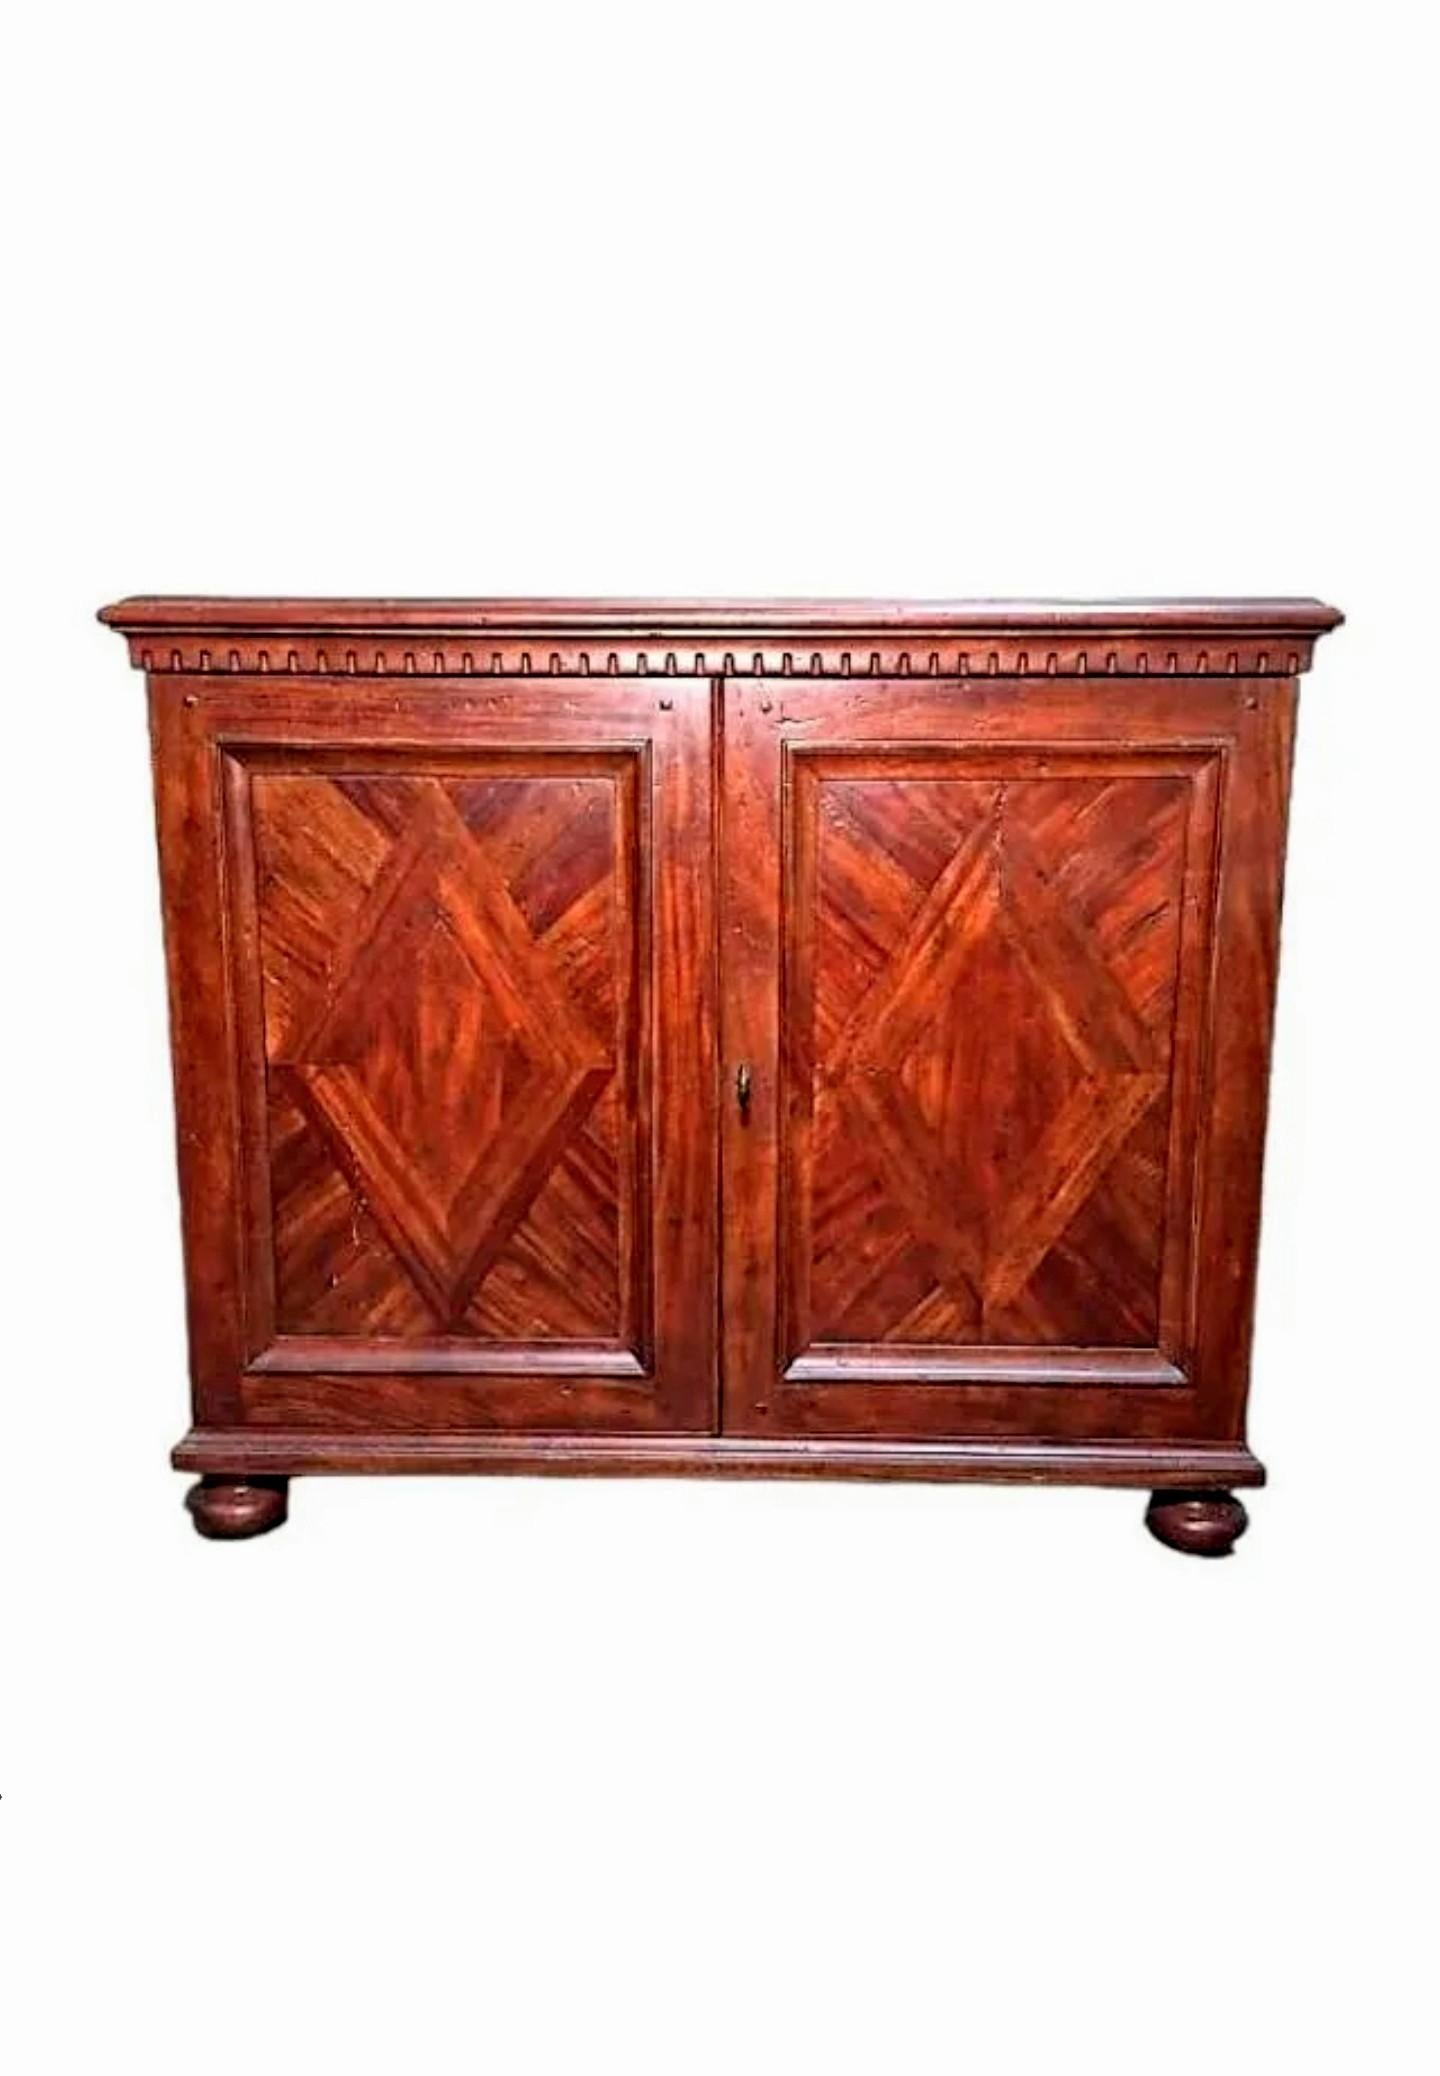 Hand-Carved Theodore Alexander Sir John's Castle Bromwich Antique Mahogany Parquetry Cabinet